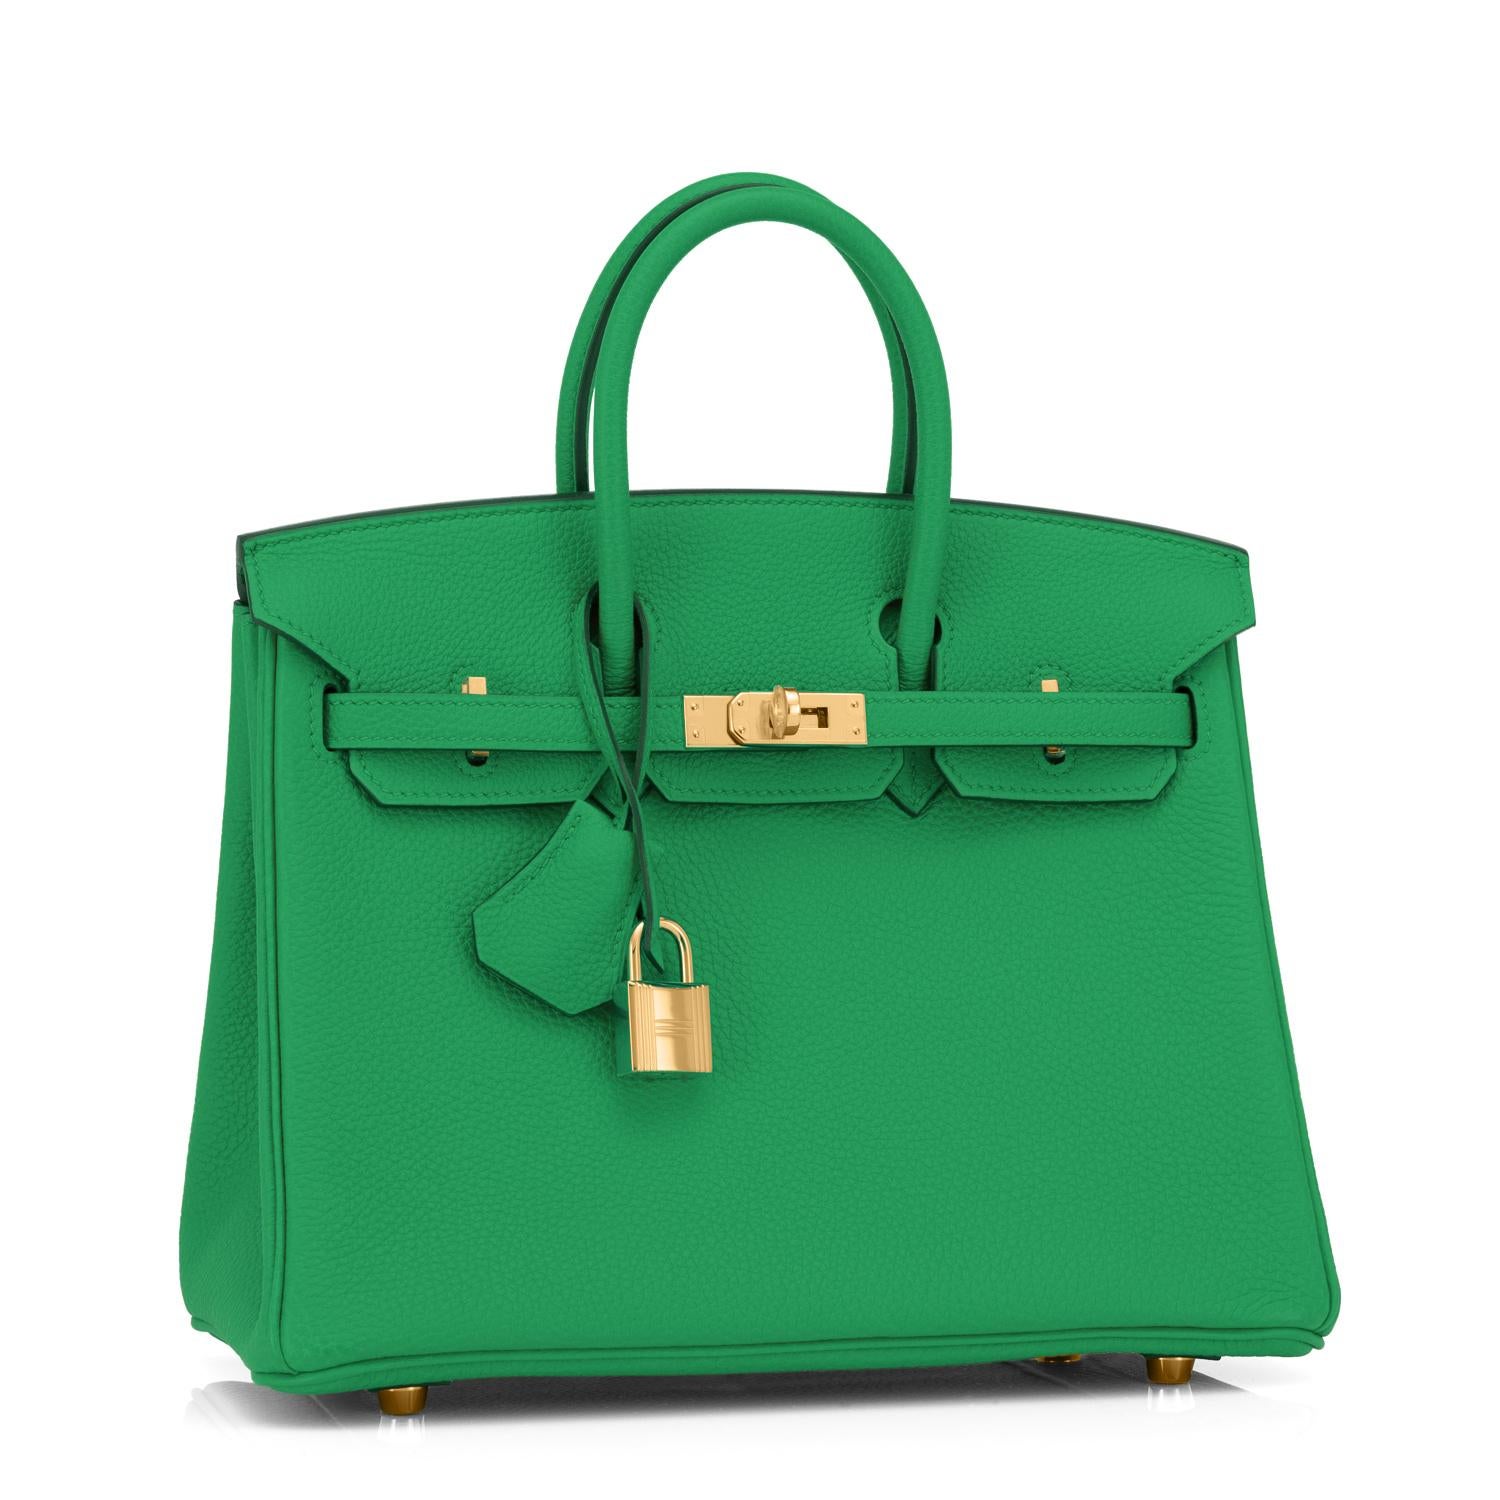 Hermes Bambou Green Togo 25cm Birkin Gold Hardware Y Stamp, 2020
Brand New in Box. Store fresh. Pristine Condition (with plastic on hardware)
Just purchased from Hermes store! Bag bears new 2020 interior Y Stamp.
Perfect gift!  Comes with keys,